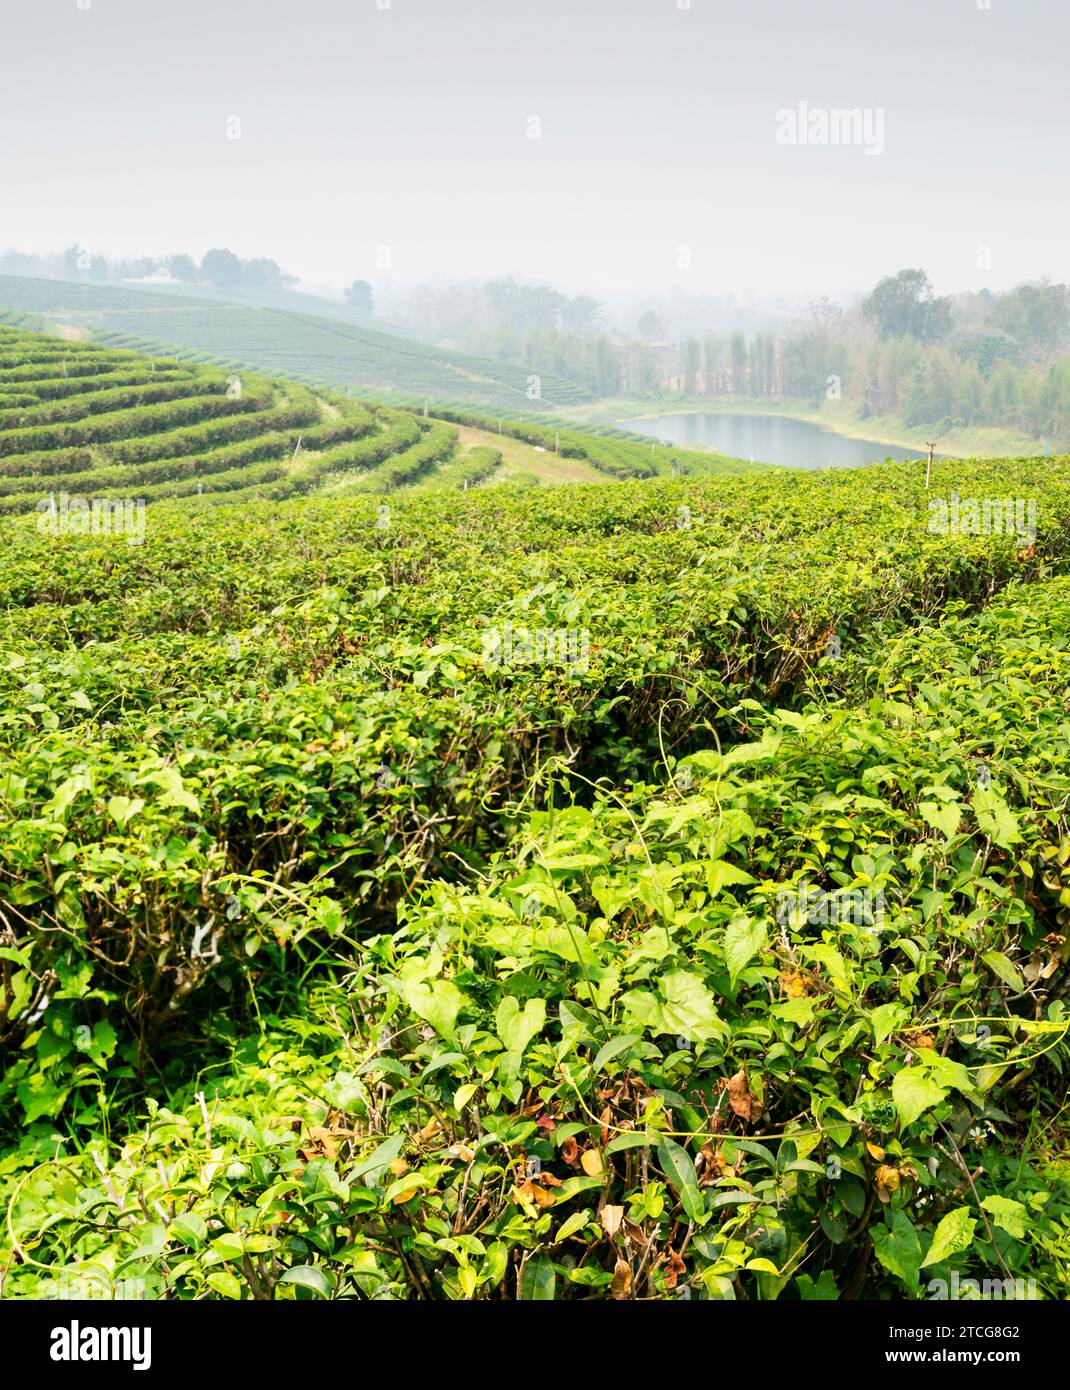 Hundreds of rows of lush Thai tea plants,and river beyond,in one of Thailand's biggest,fine quality tea producing areas.Hazy,smokey landscape,during c Stock Photo